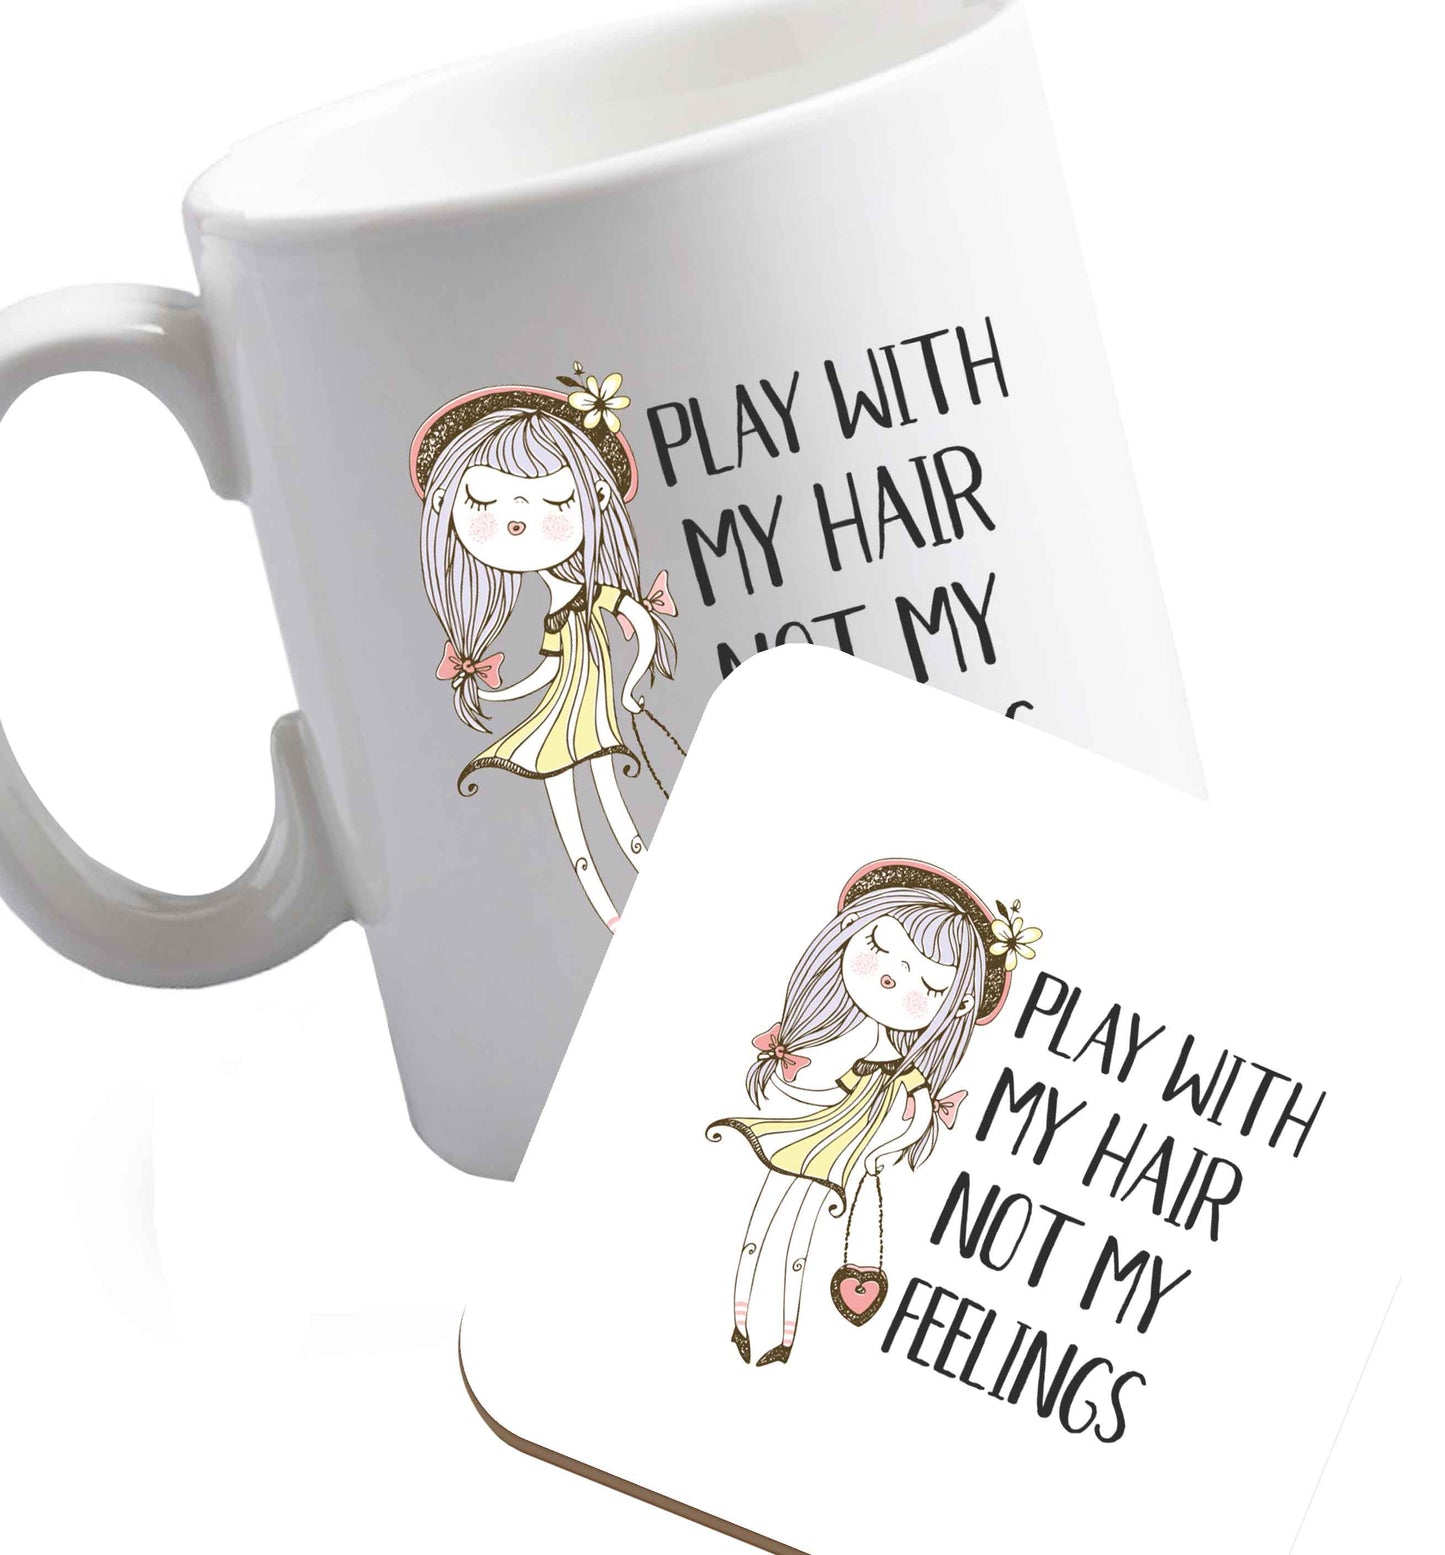 10 oz Play with my hair not my feelings illustration  ceramic mug and coaster set right handed